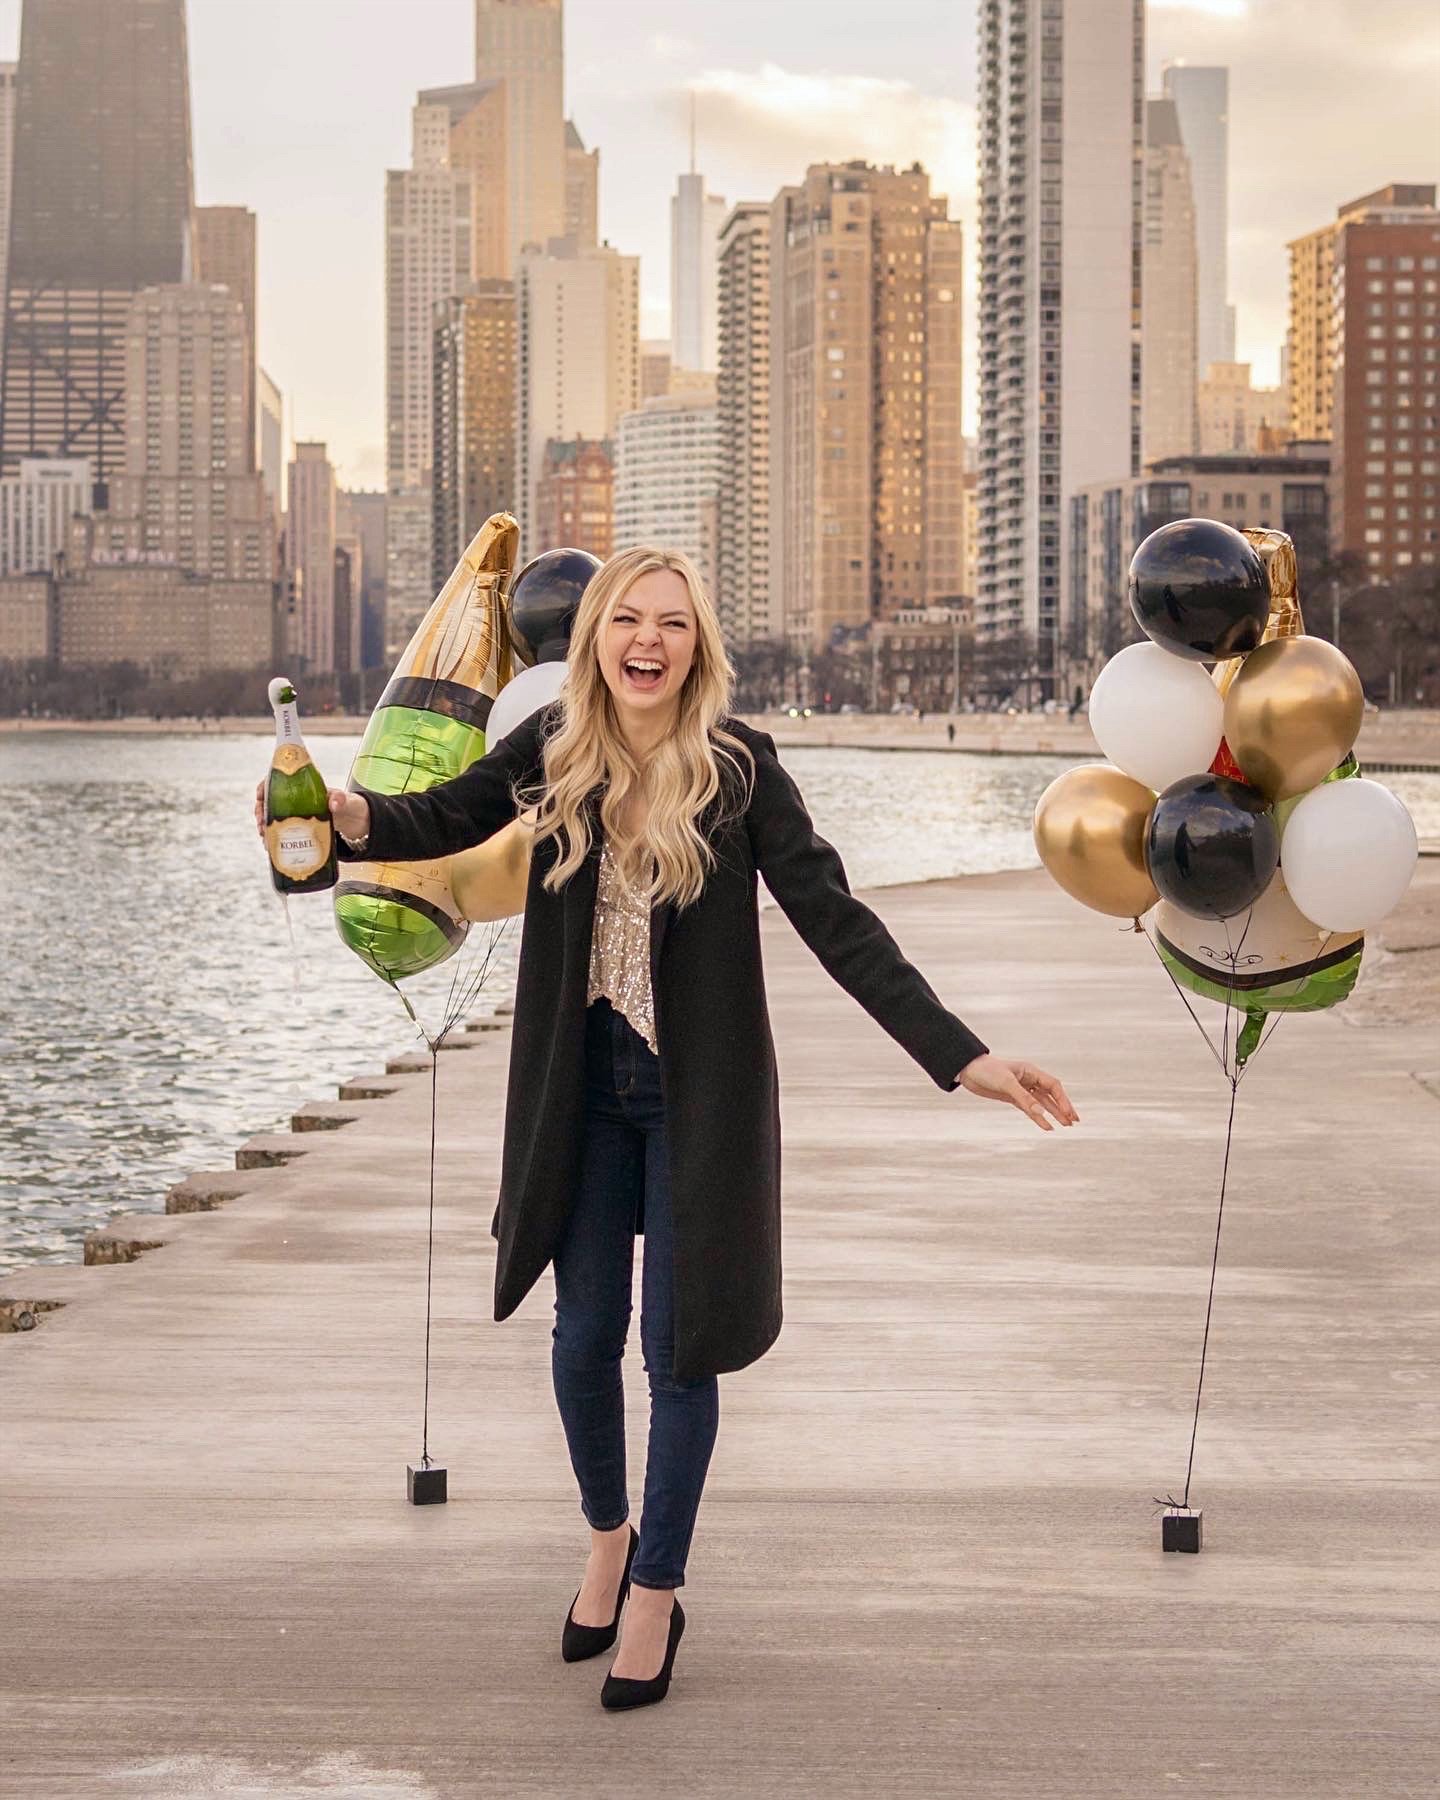 Jess Roe, The Windy City Mama, on Chicago lakefront in a influencer marketing partnership with a balloon brand